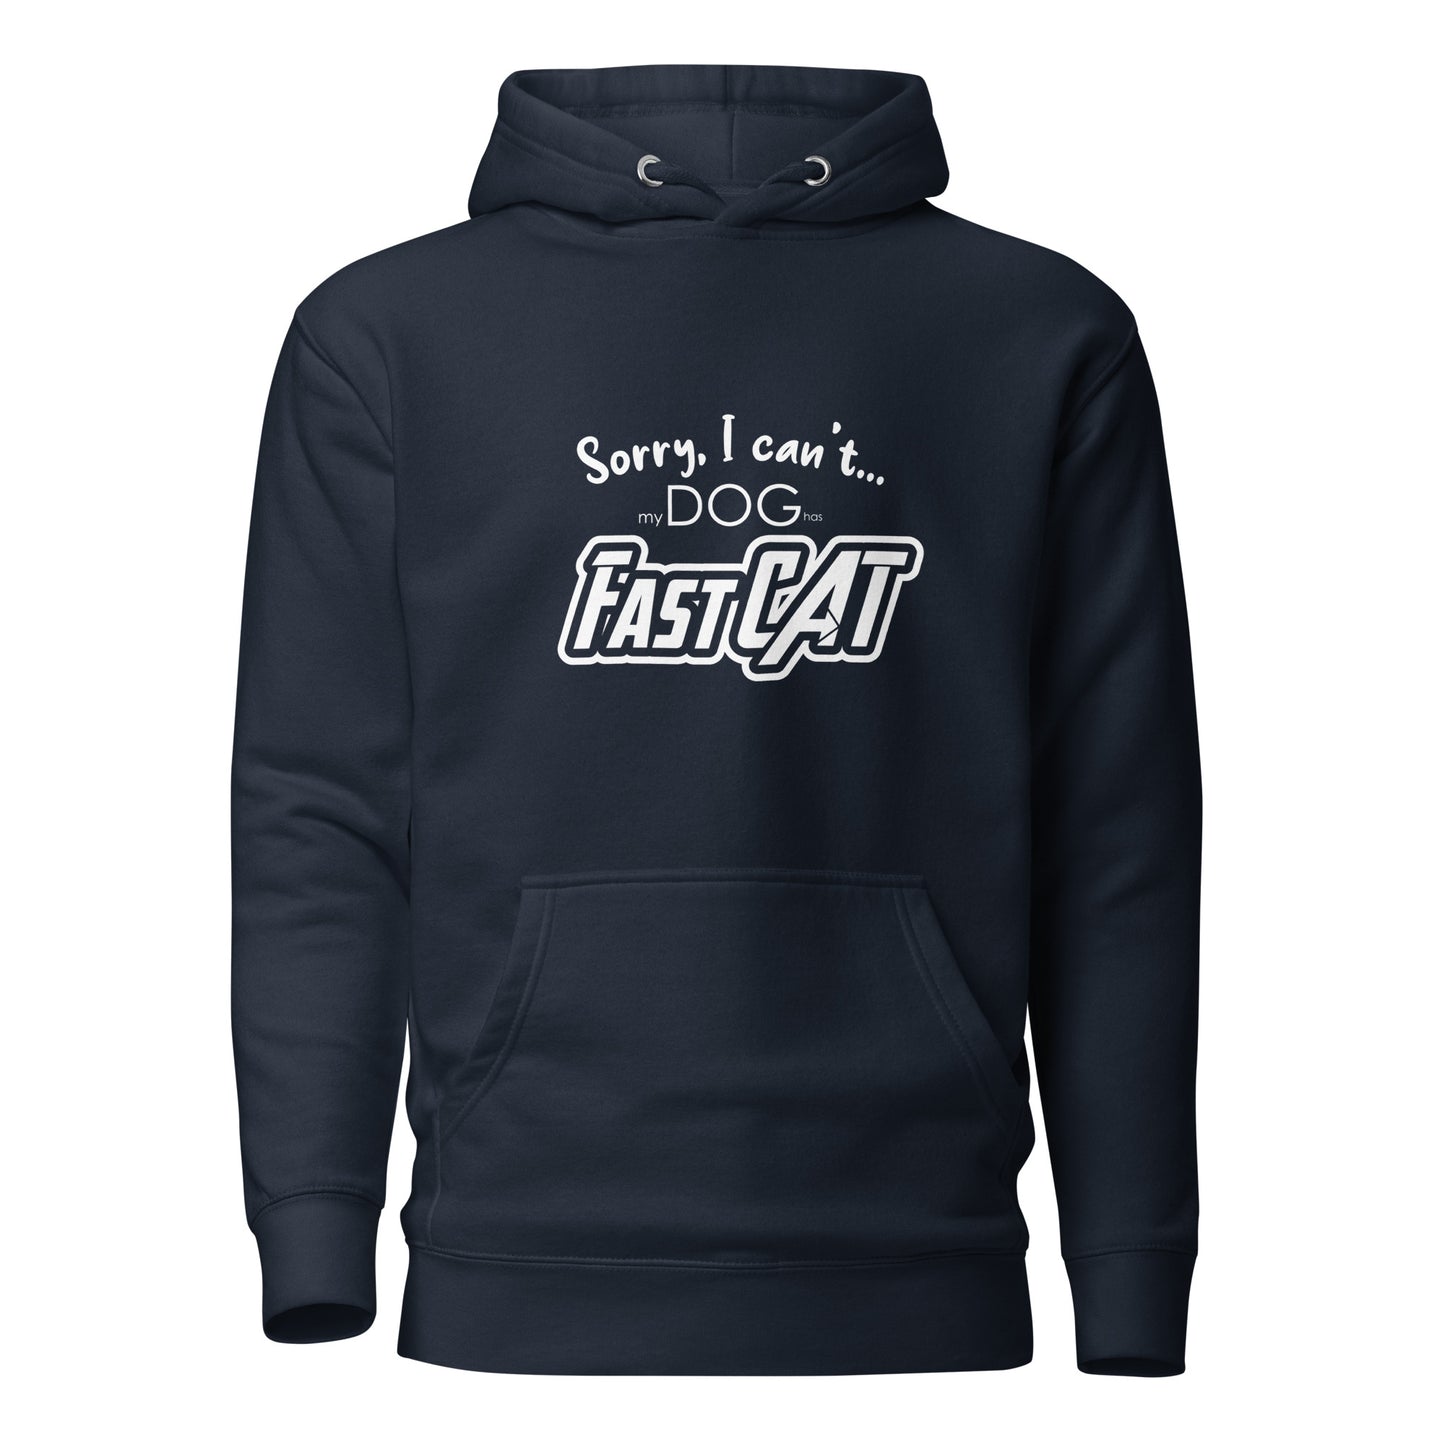 SORRY I CANT - FAST CAT - Unisex Hoodie